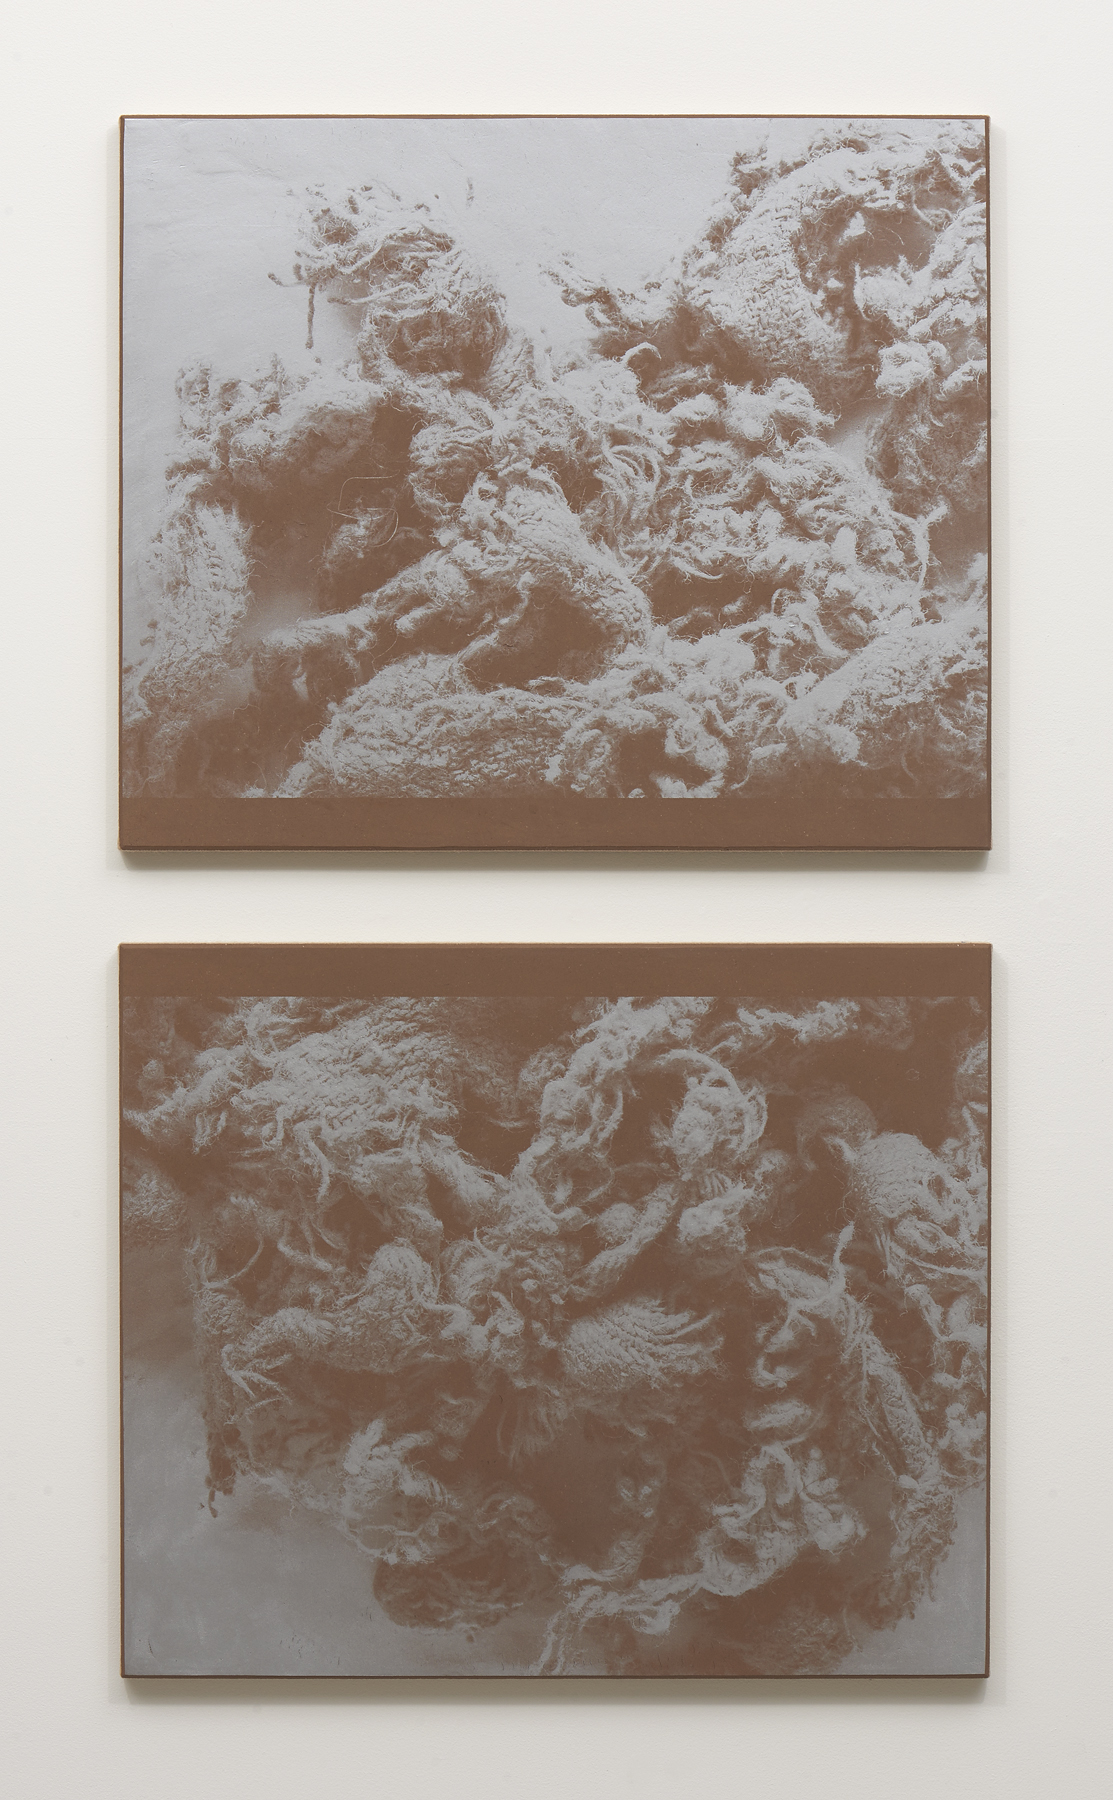   N. Dash , Untitled, 2018, Adobe, silkscreen ink, jute, wood and aluminum support, Two panels, each: 39 x 33 inches 